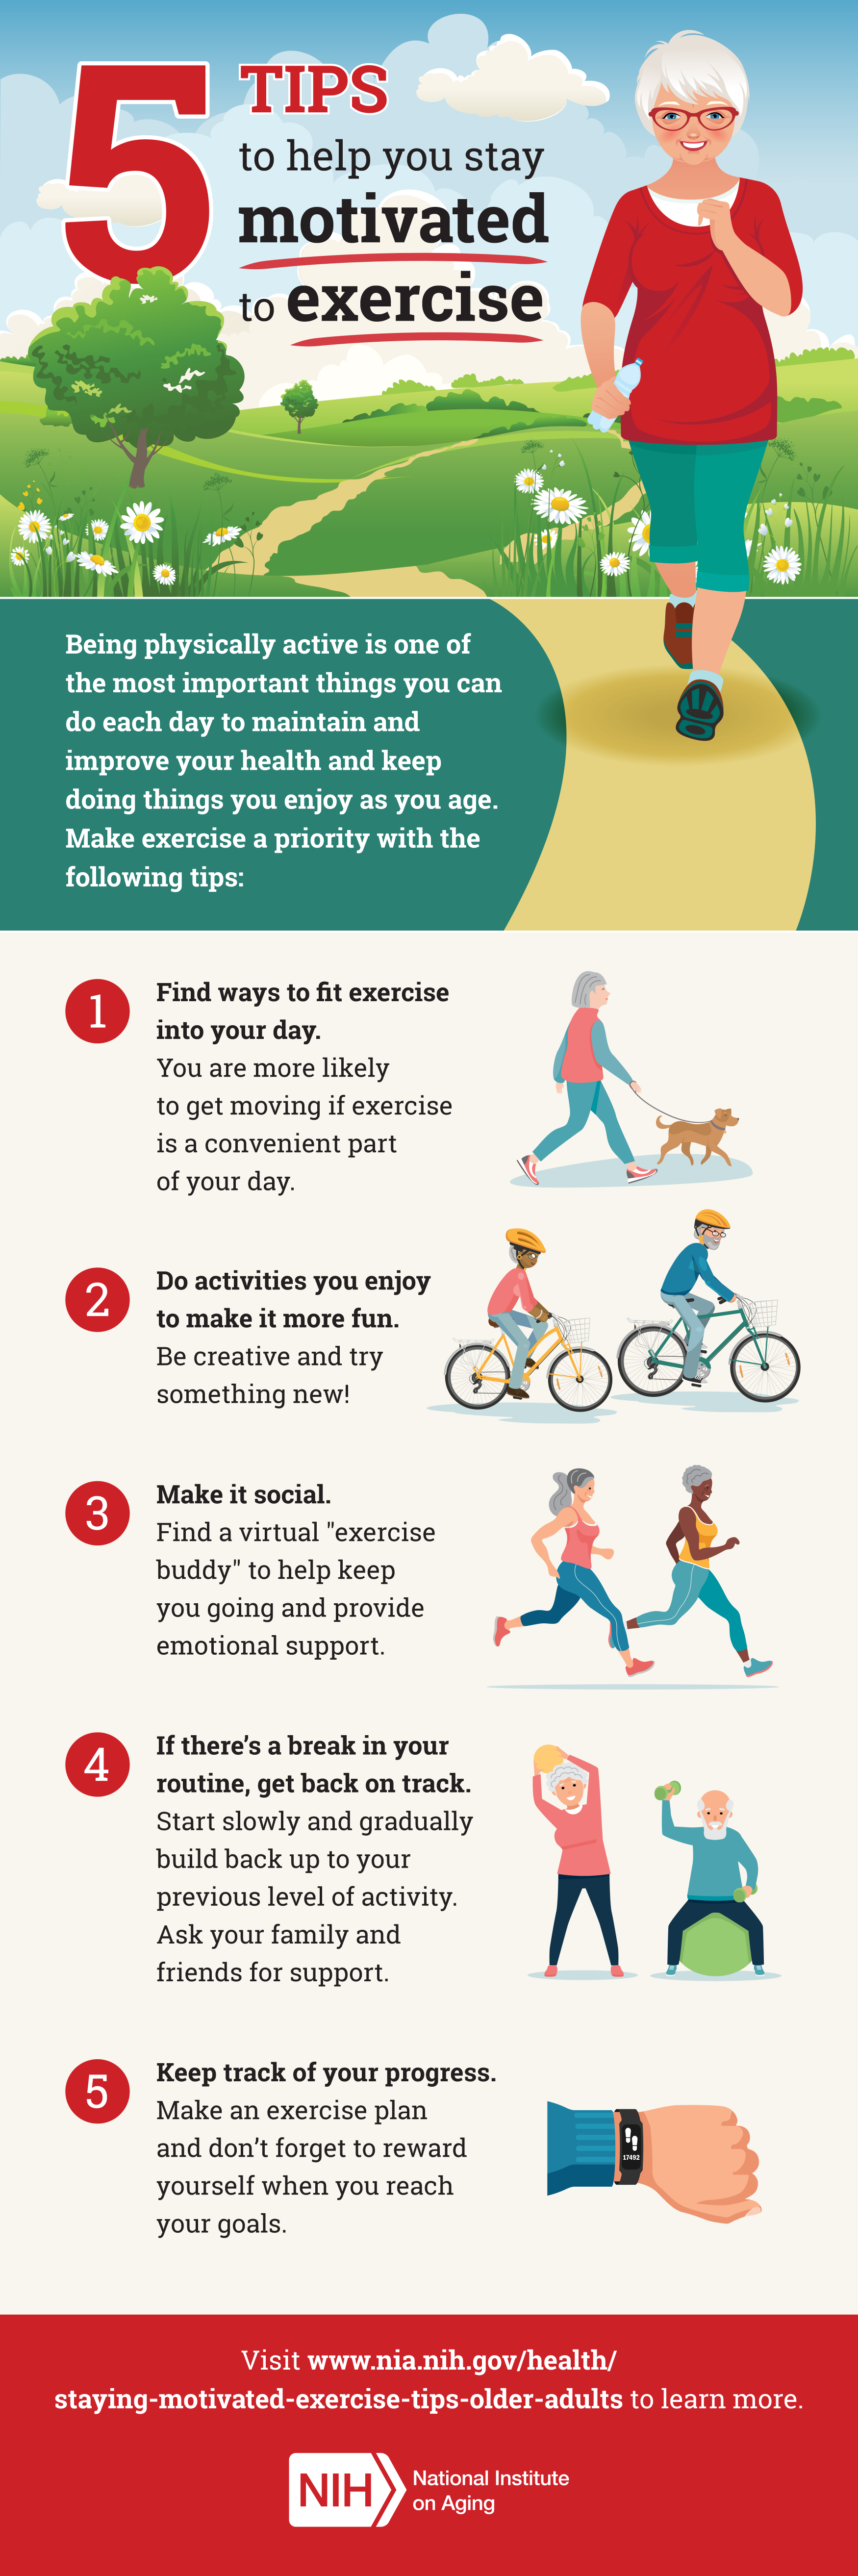 How Older Adults Can Get Started With Exercise pic